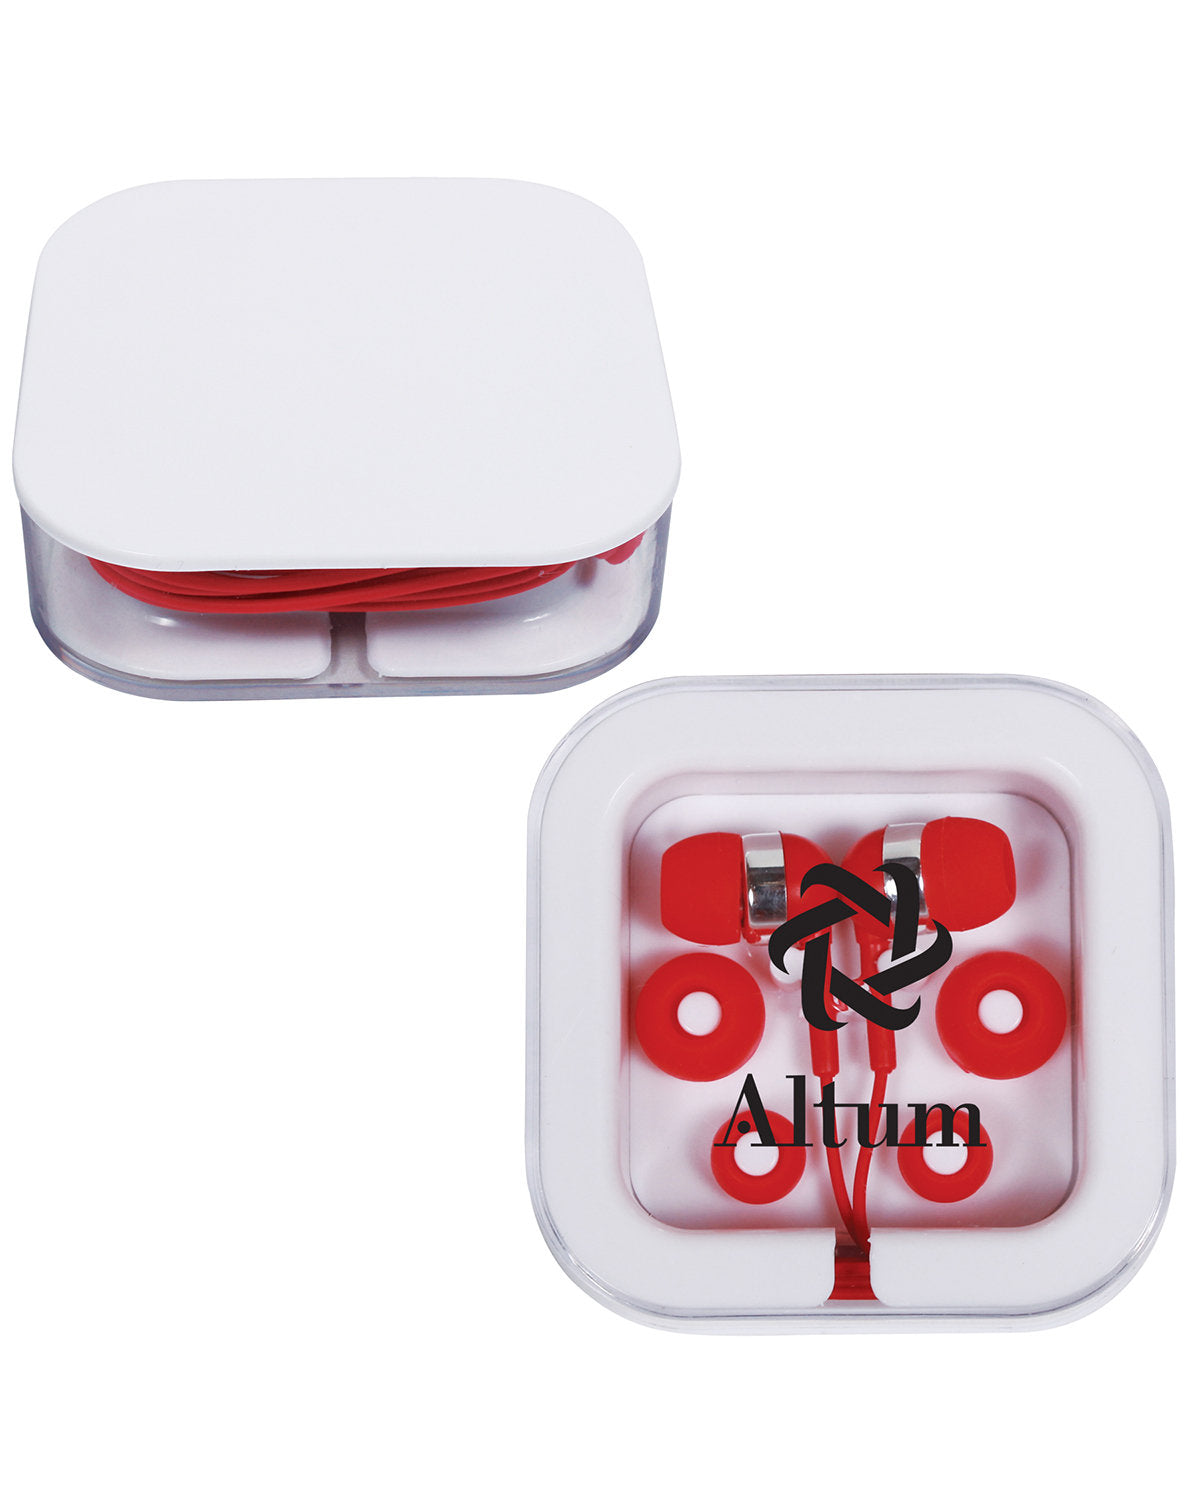 Earbuds In Square Case